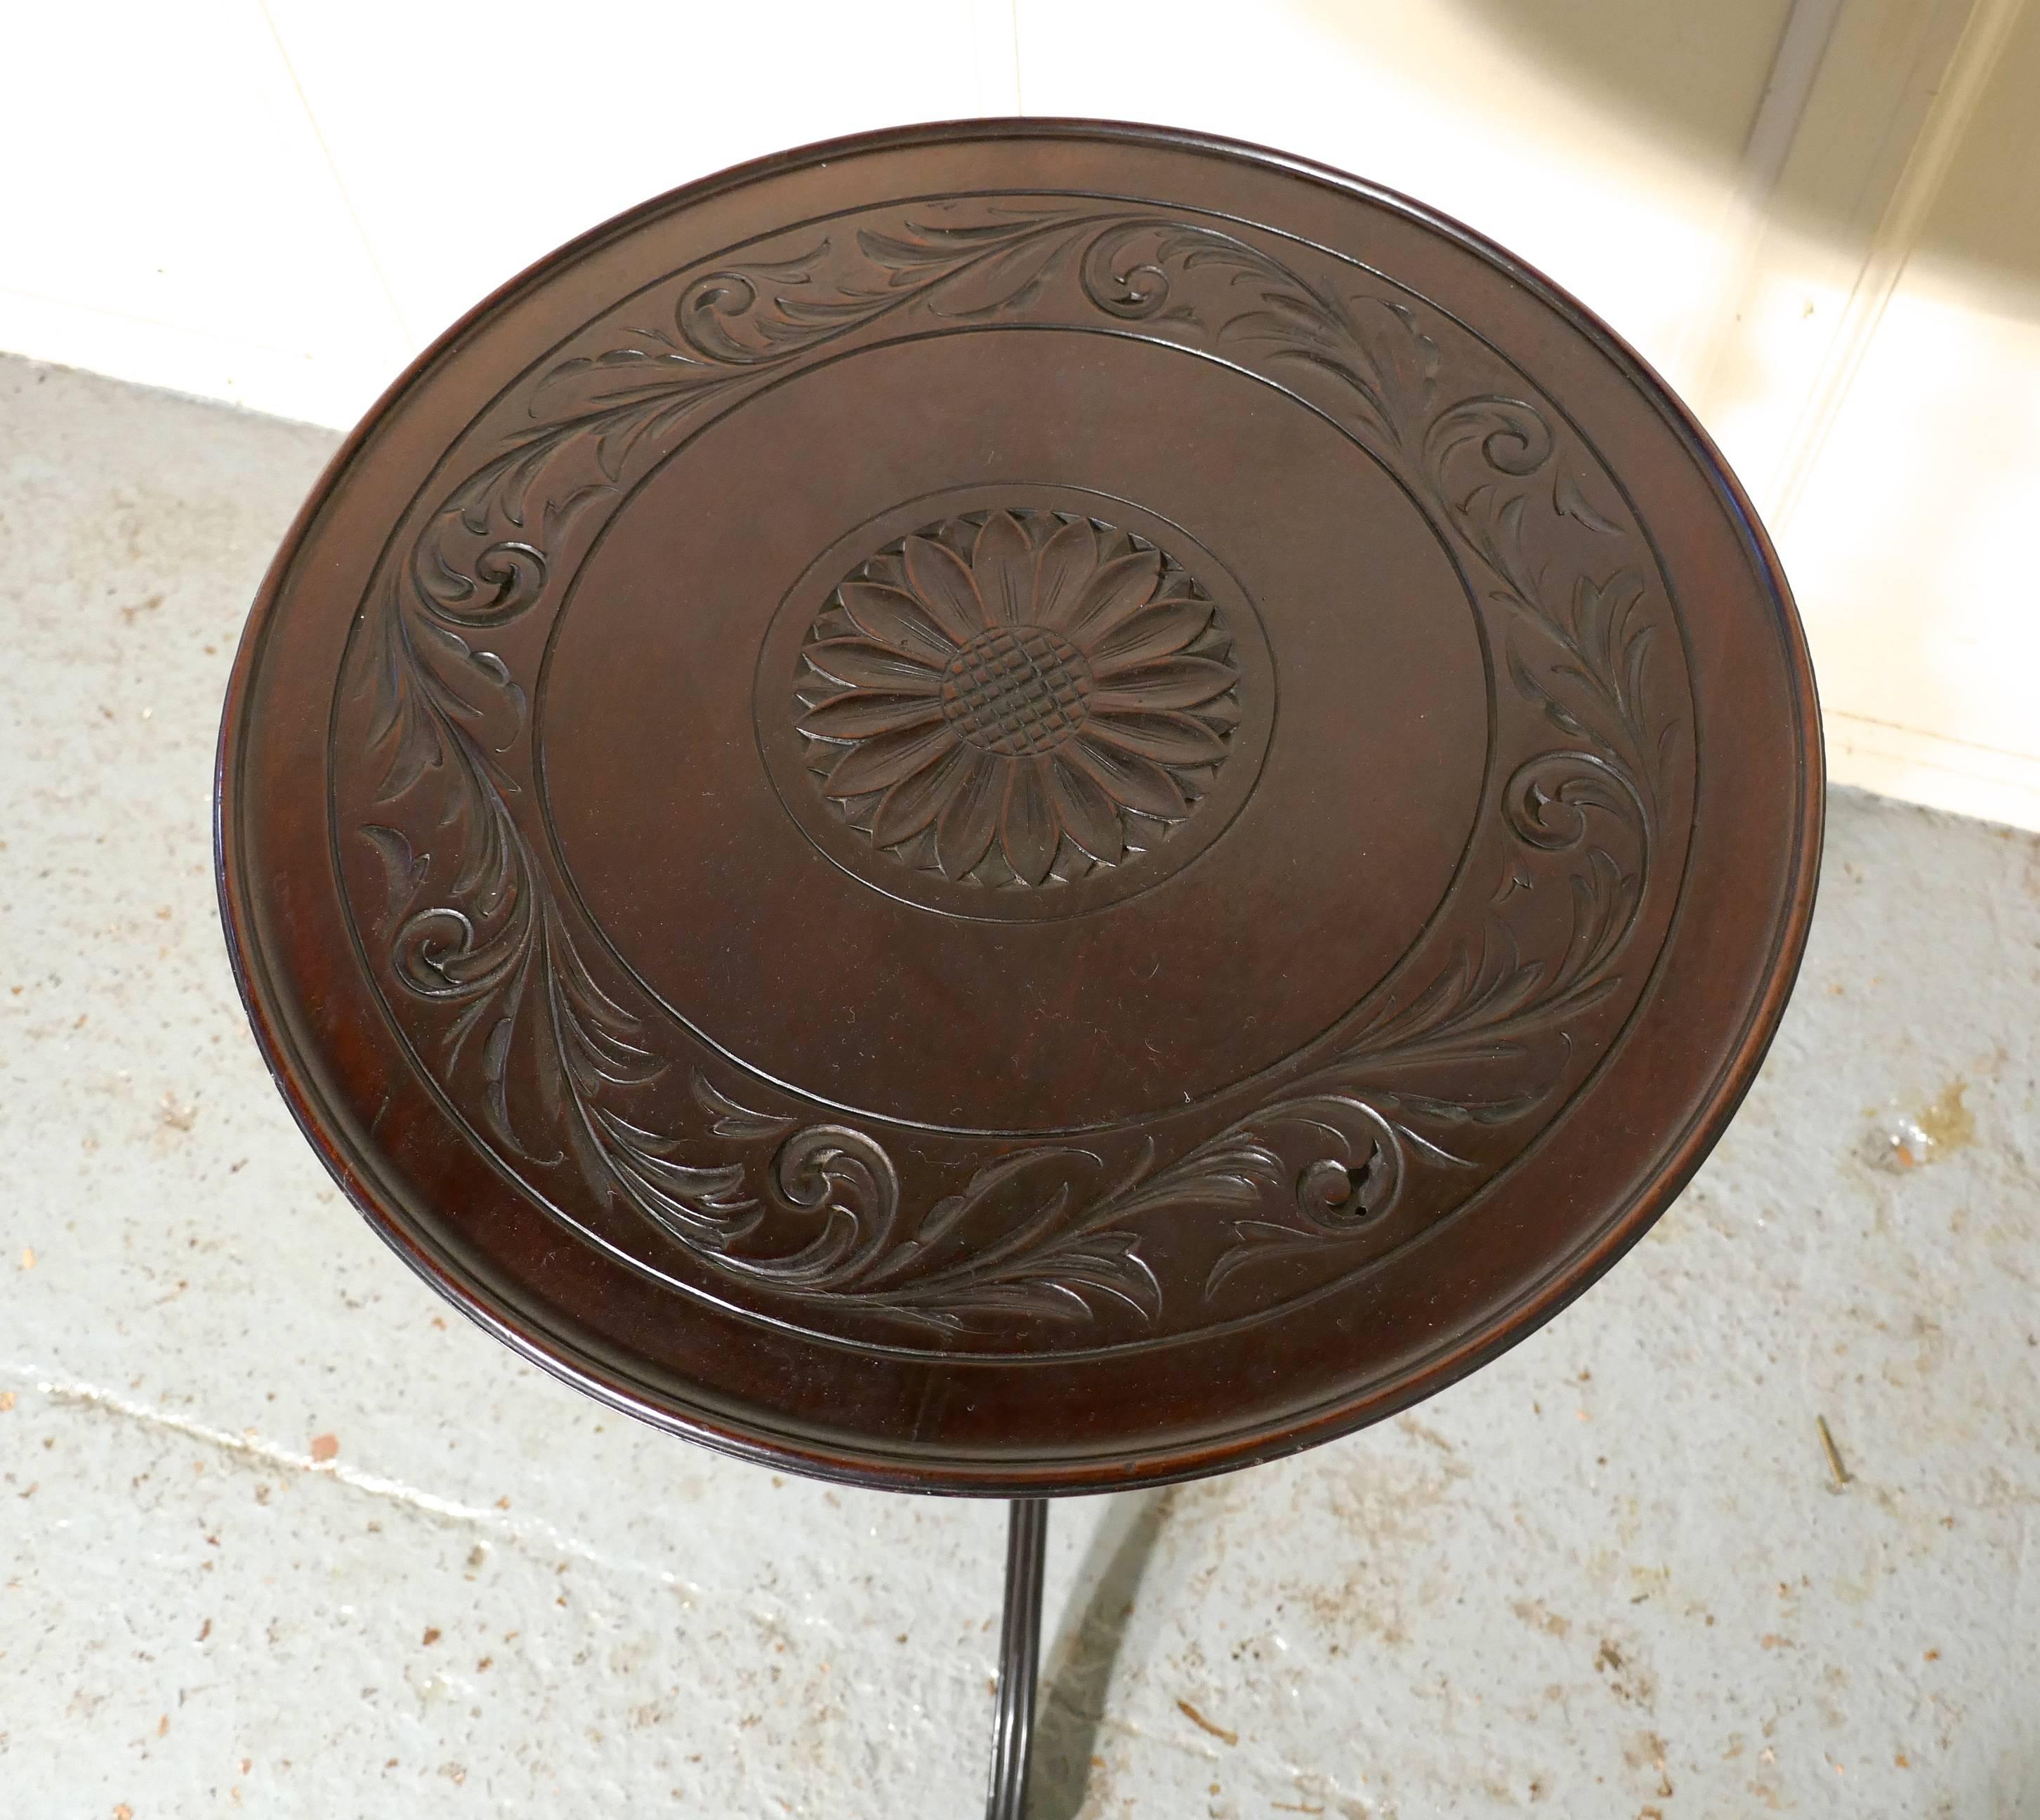 Carved Art Nouveau mahogany wine table by Bulstrode of Cambridge

This lovely and unusual table it stands on a very unusual three footed base, with has an exquisitely turned centre column with the reeded splayed legs scrolling out from quite a